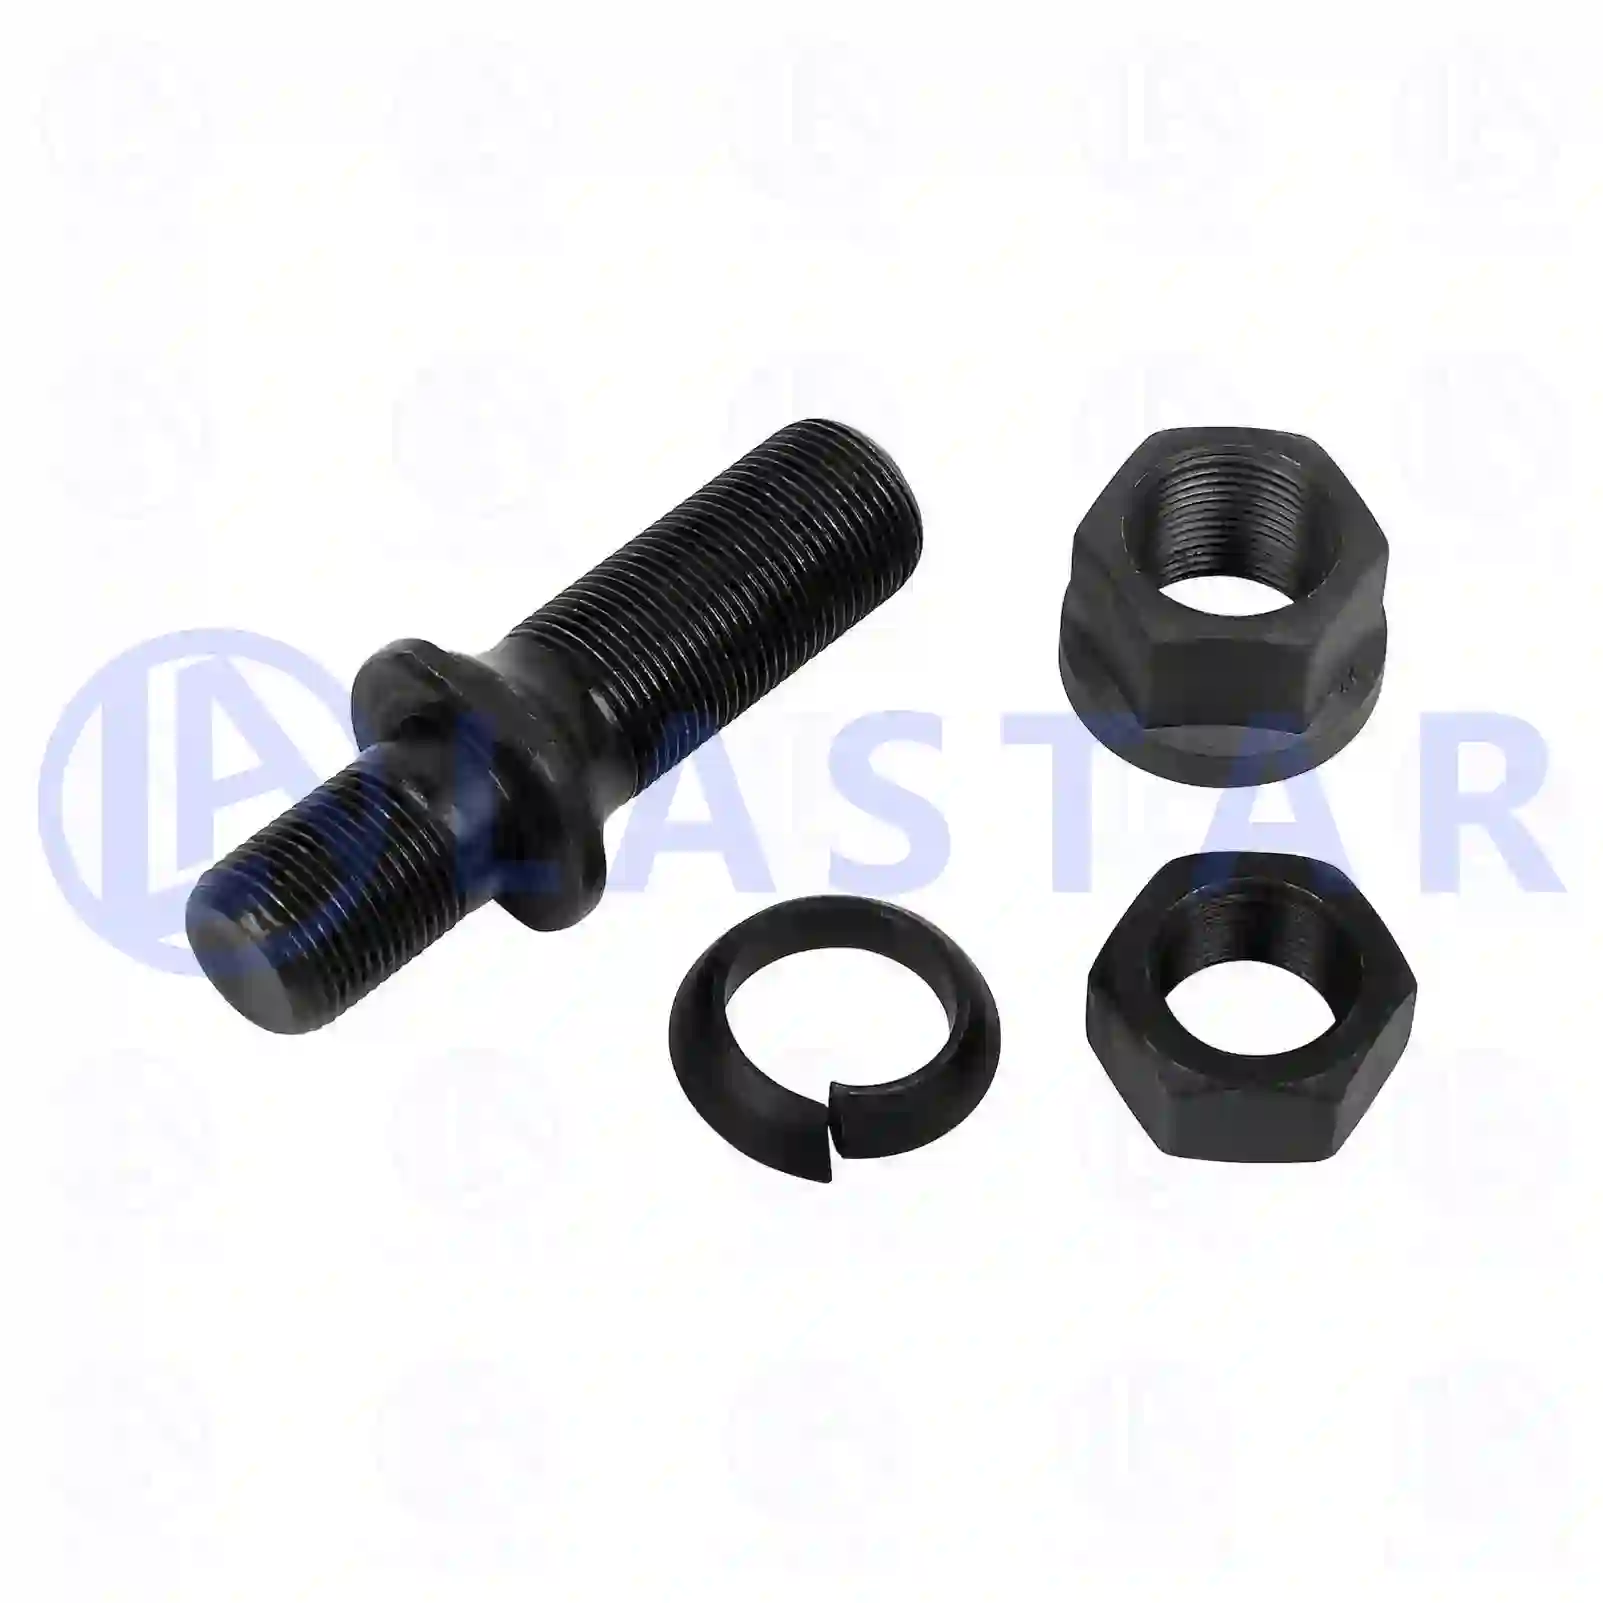 Wheel bolt, complete, 77726423, 3044020271S1, , , ||  77726423 Lastar Spare Part | Truck Spare Parts, Auotomotive Spare Parts Wheel bolt, complete, 77726423, 3044020271S1, , , ||  77726423 Lastar Spare Part | Truck Spare Parts, Auotomotive Spare Parts